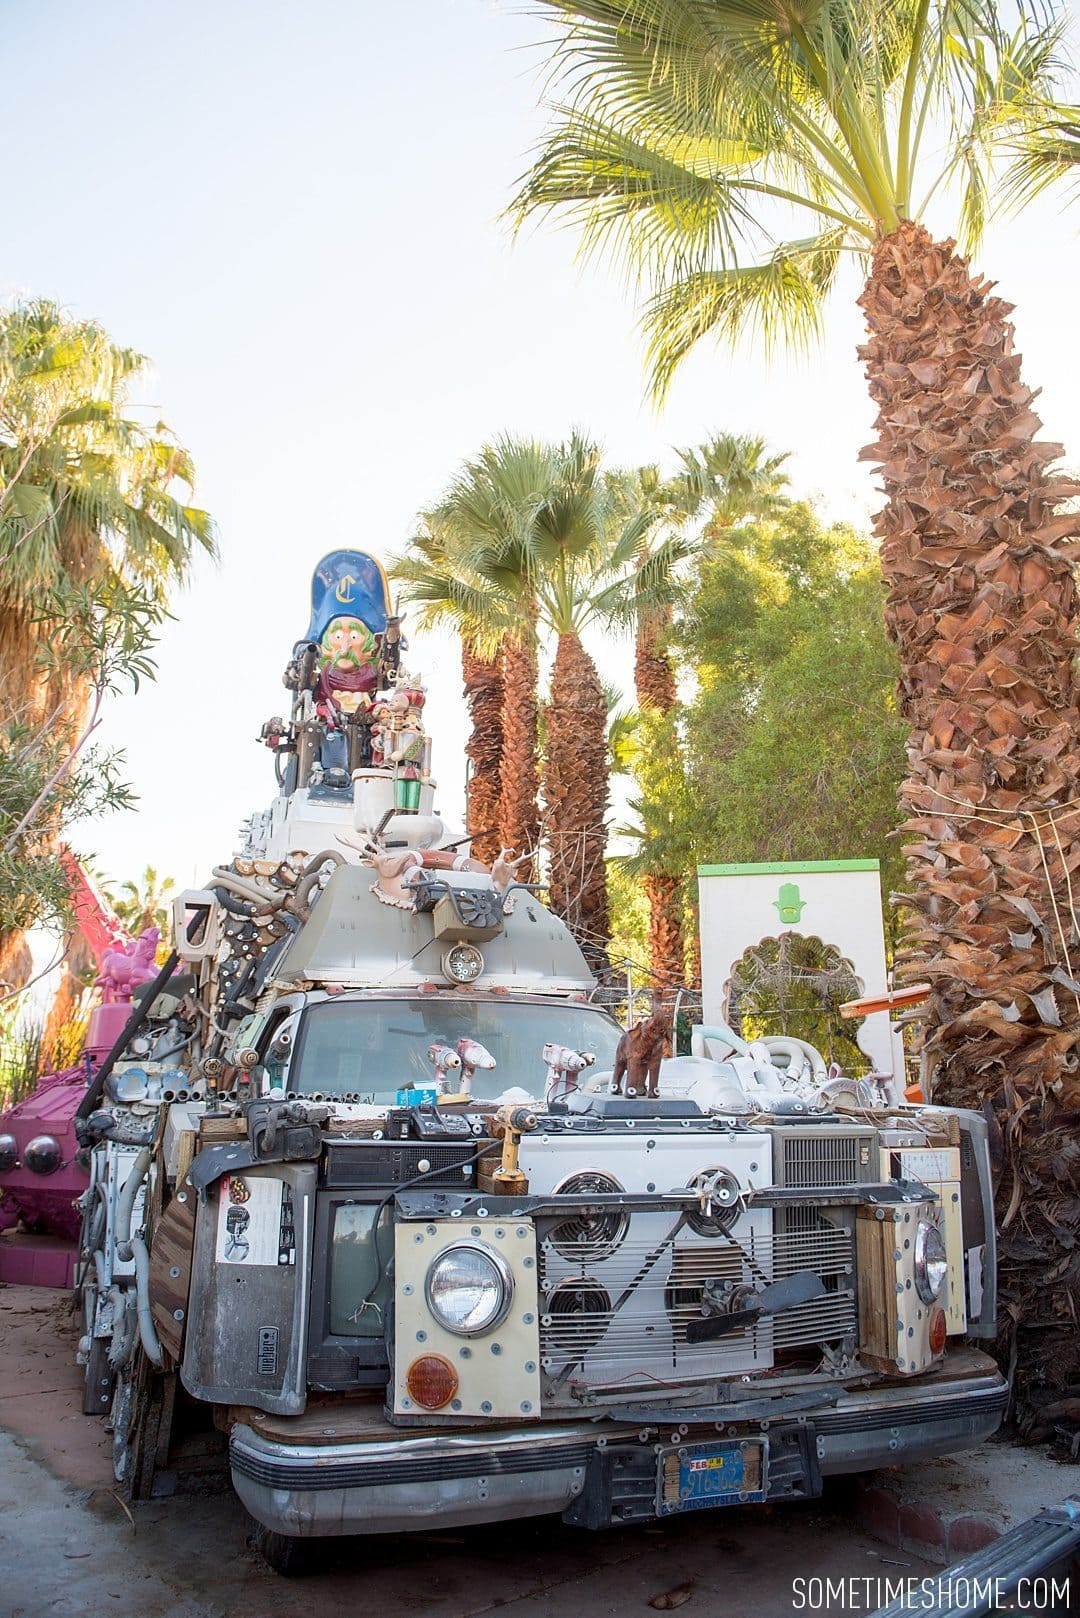 Two days in Palm Springs with photos by Sometimes Home travel blog. Attraction to see called Robolights with images of pieced together trash-to-treasure creations.